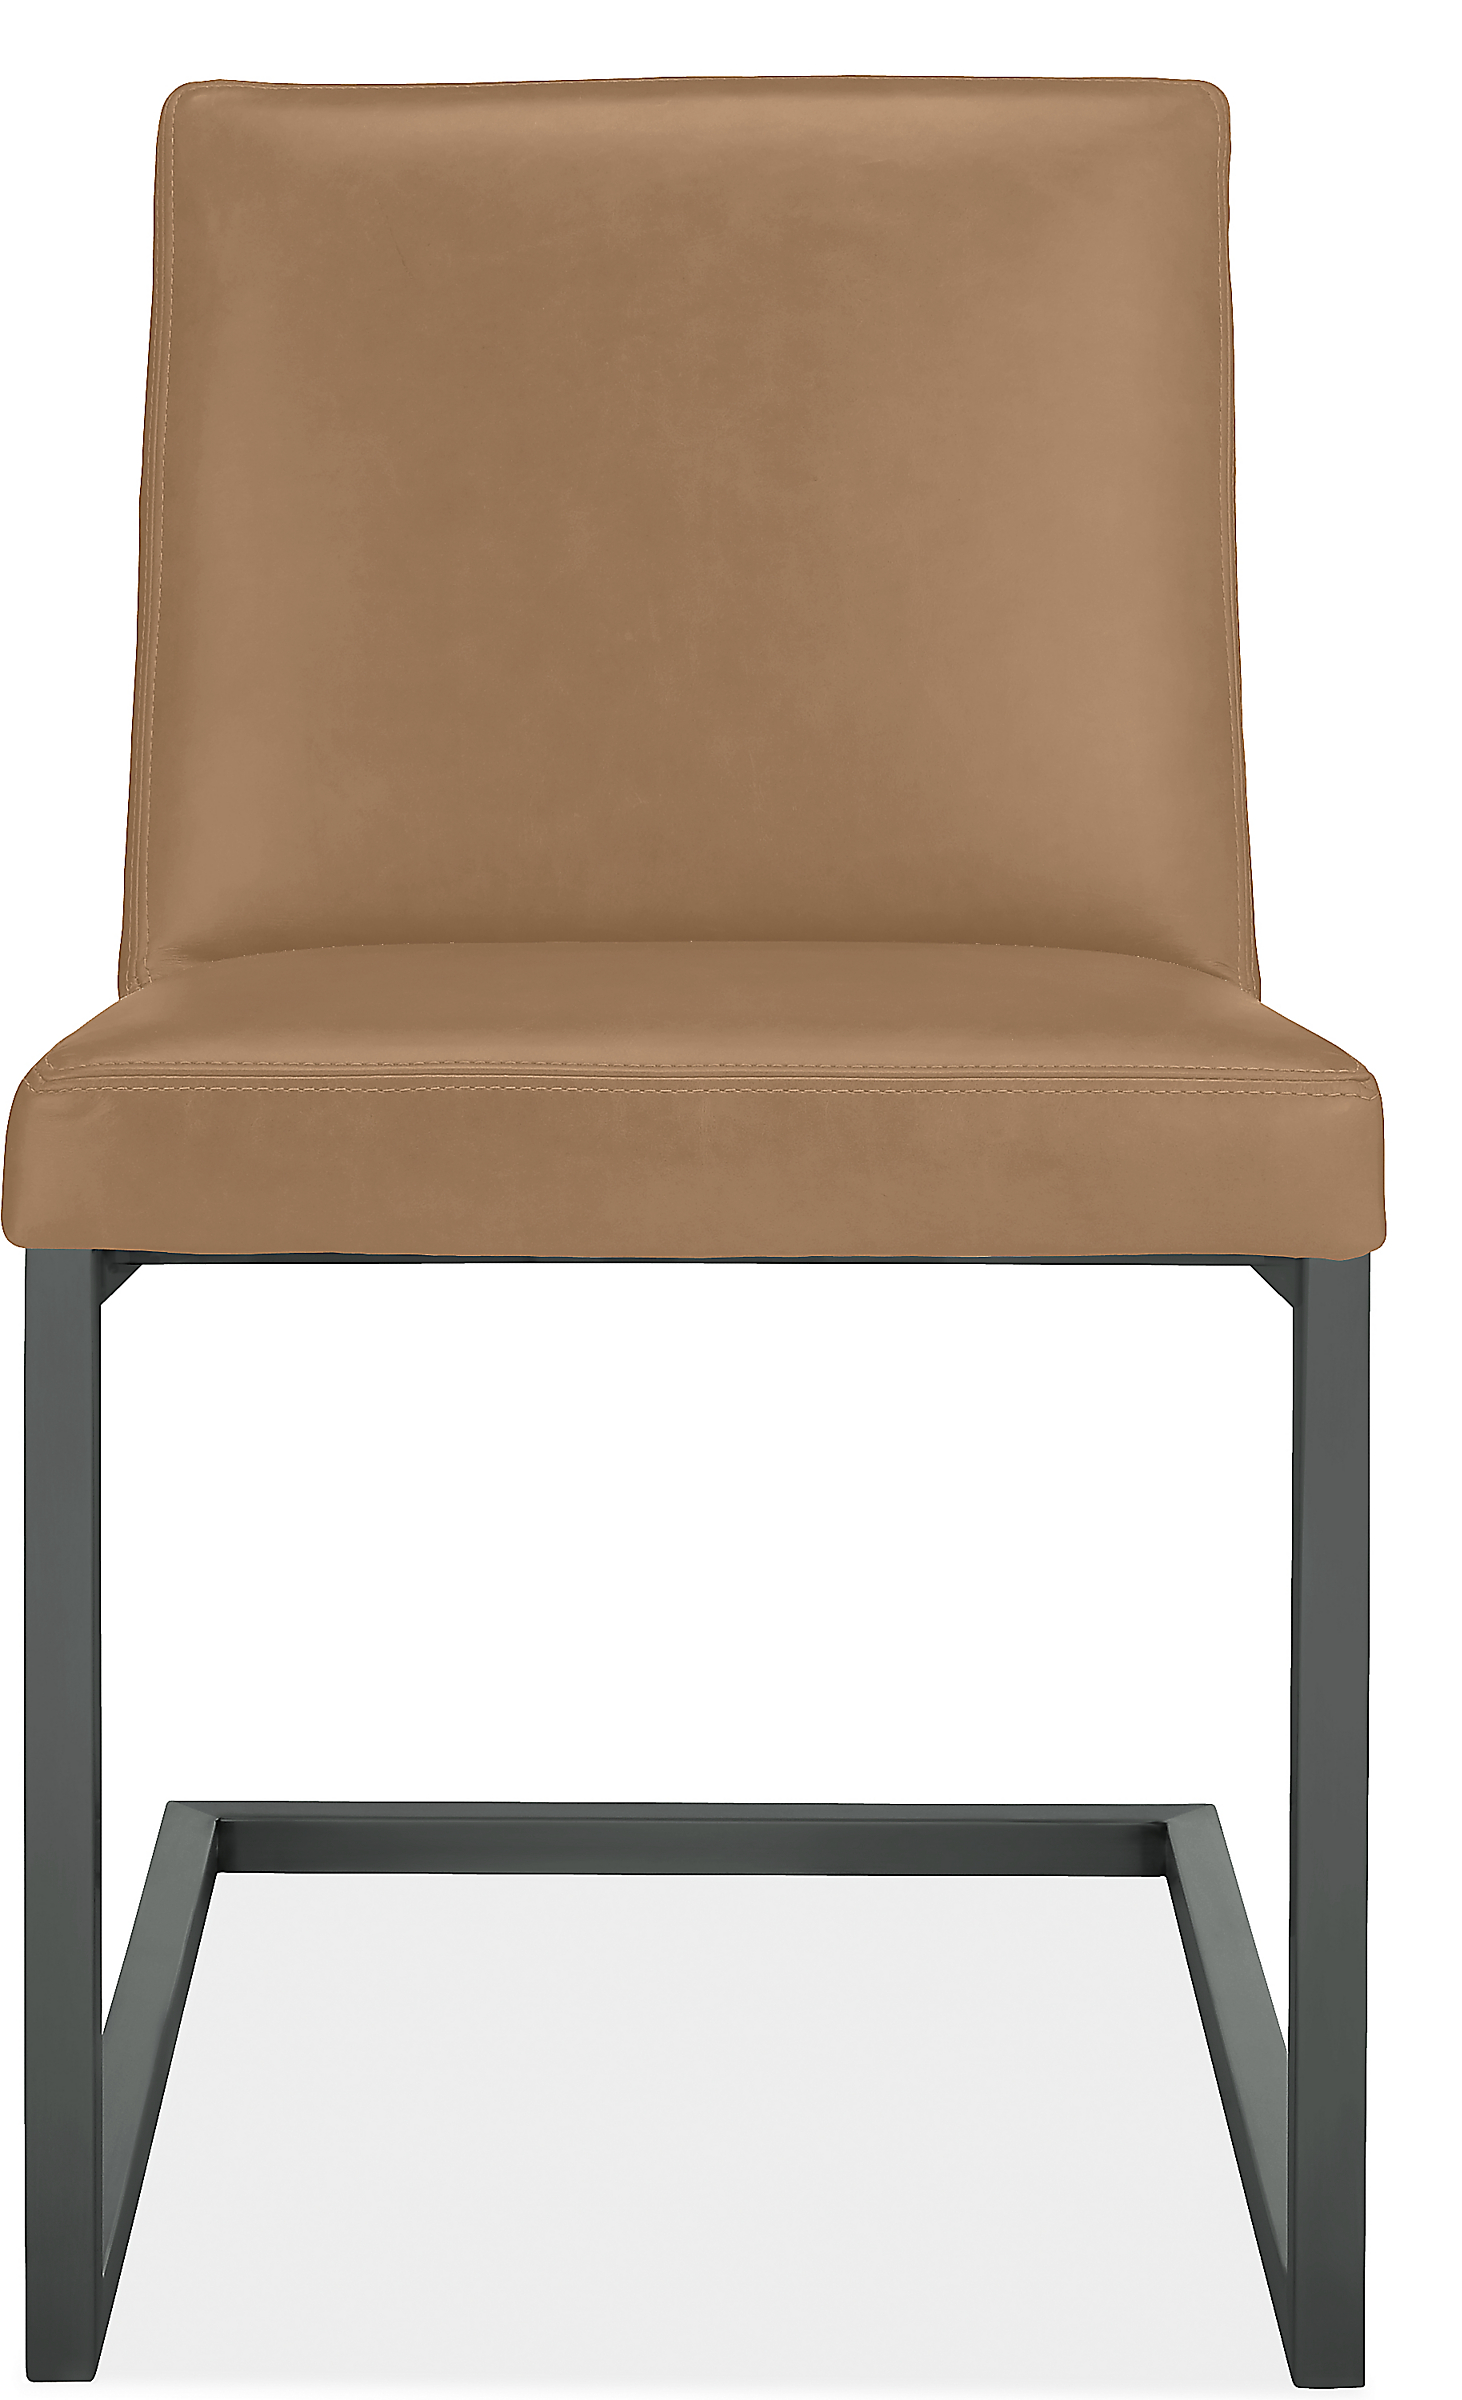 Front view of Lira Side Chair in Urbino Leather.